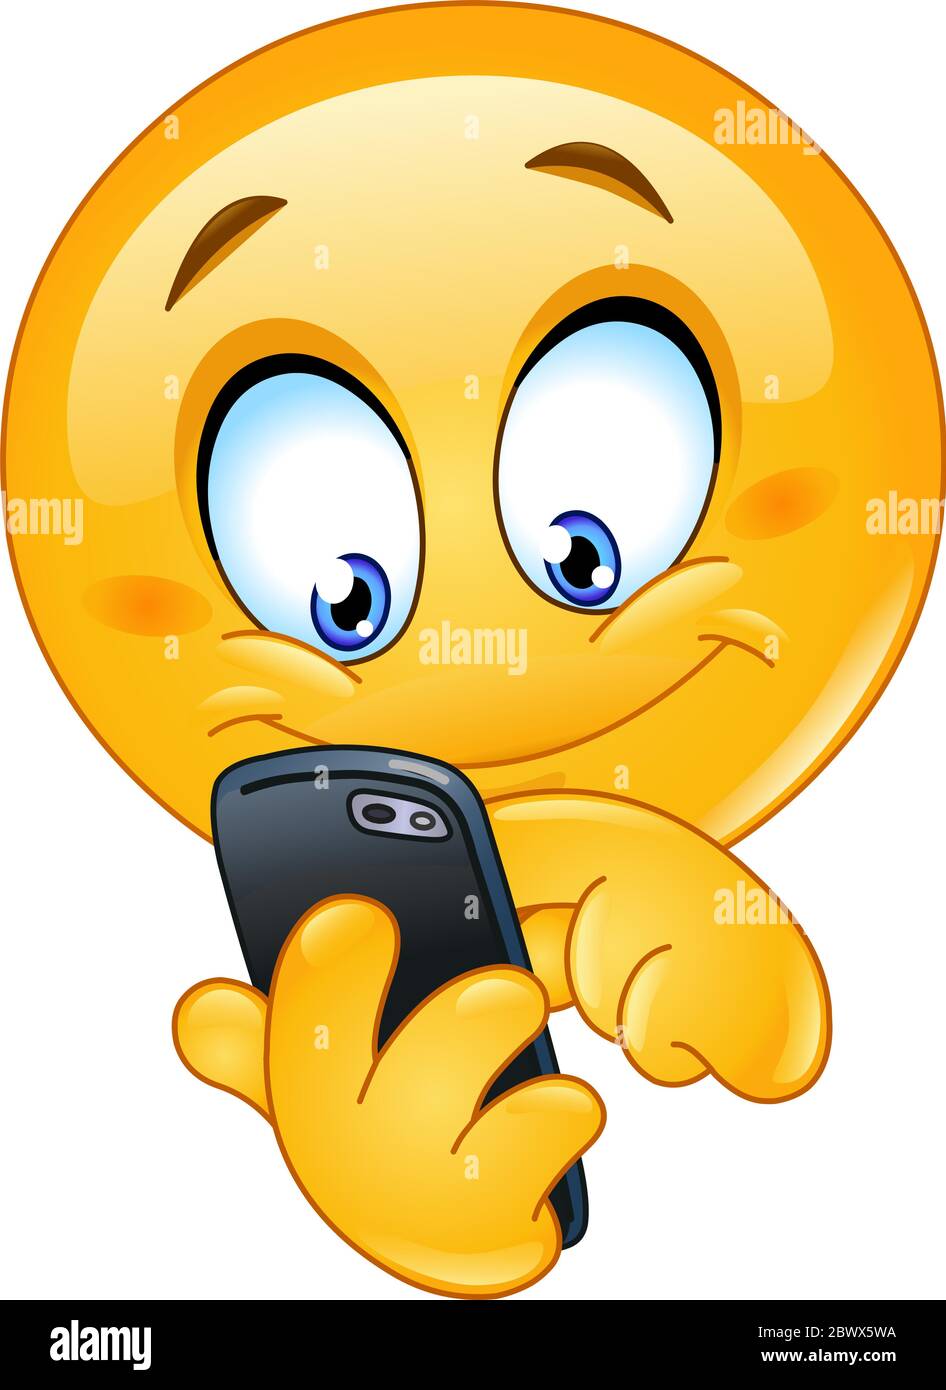 Emoji trying to smile for the 100th time infront of a docked phone